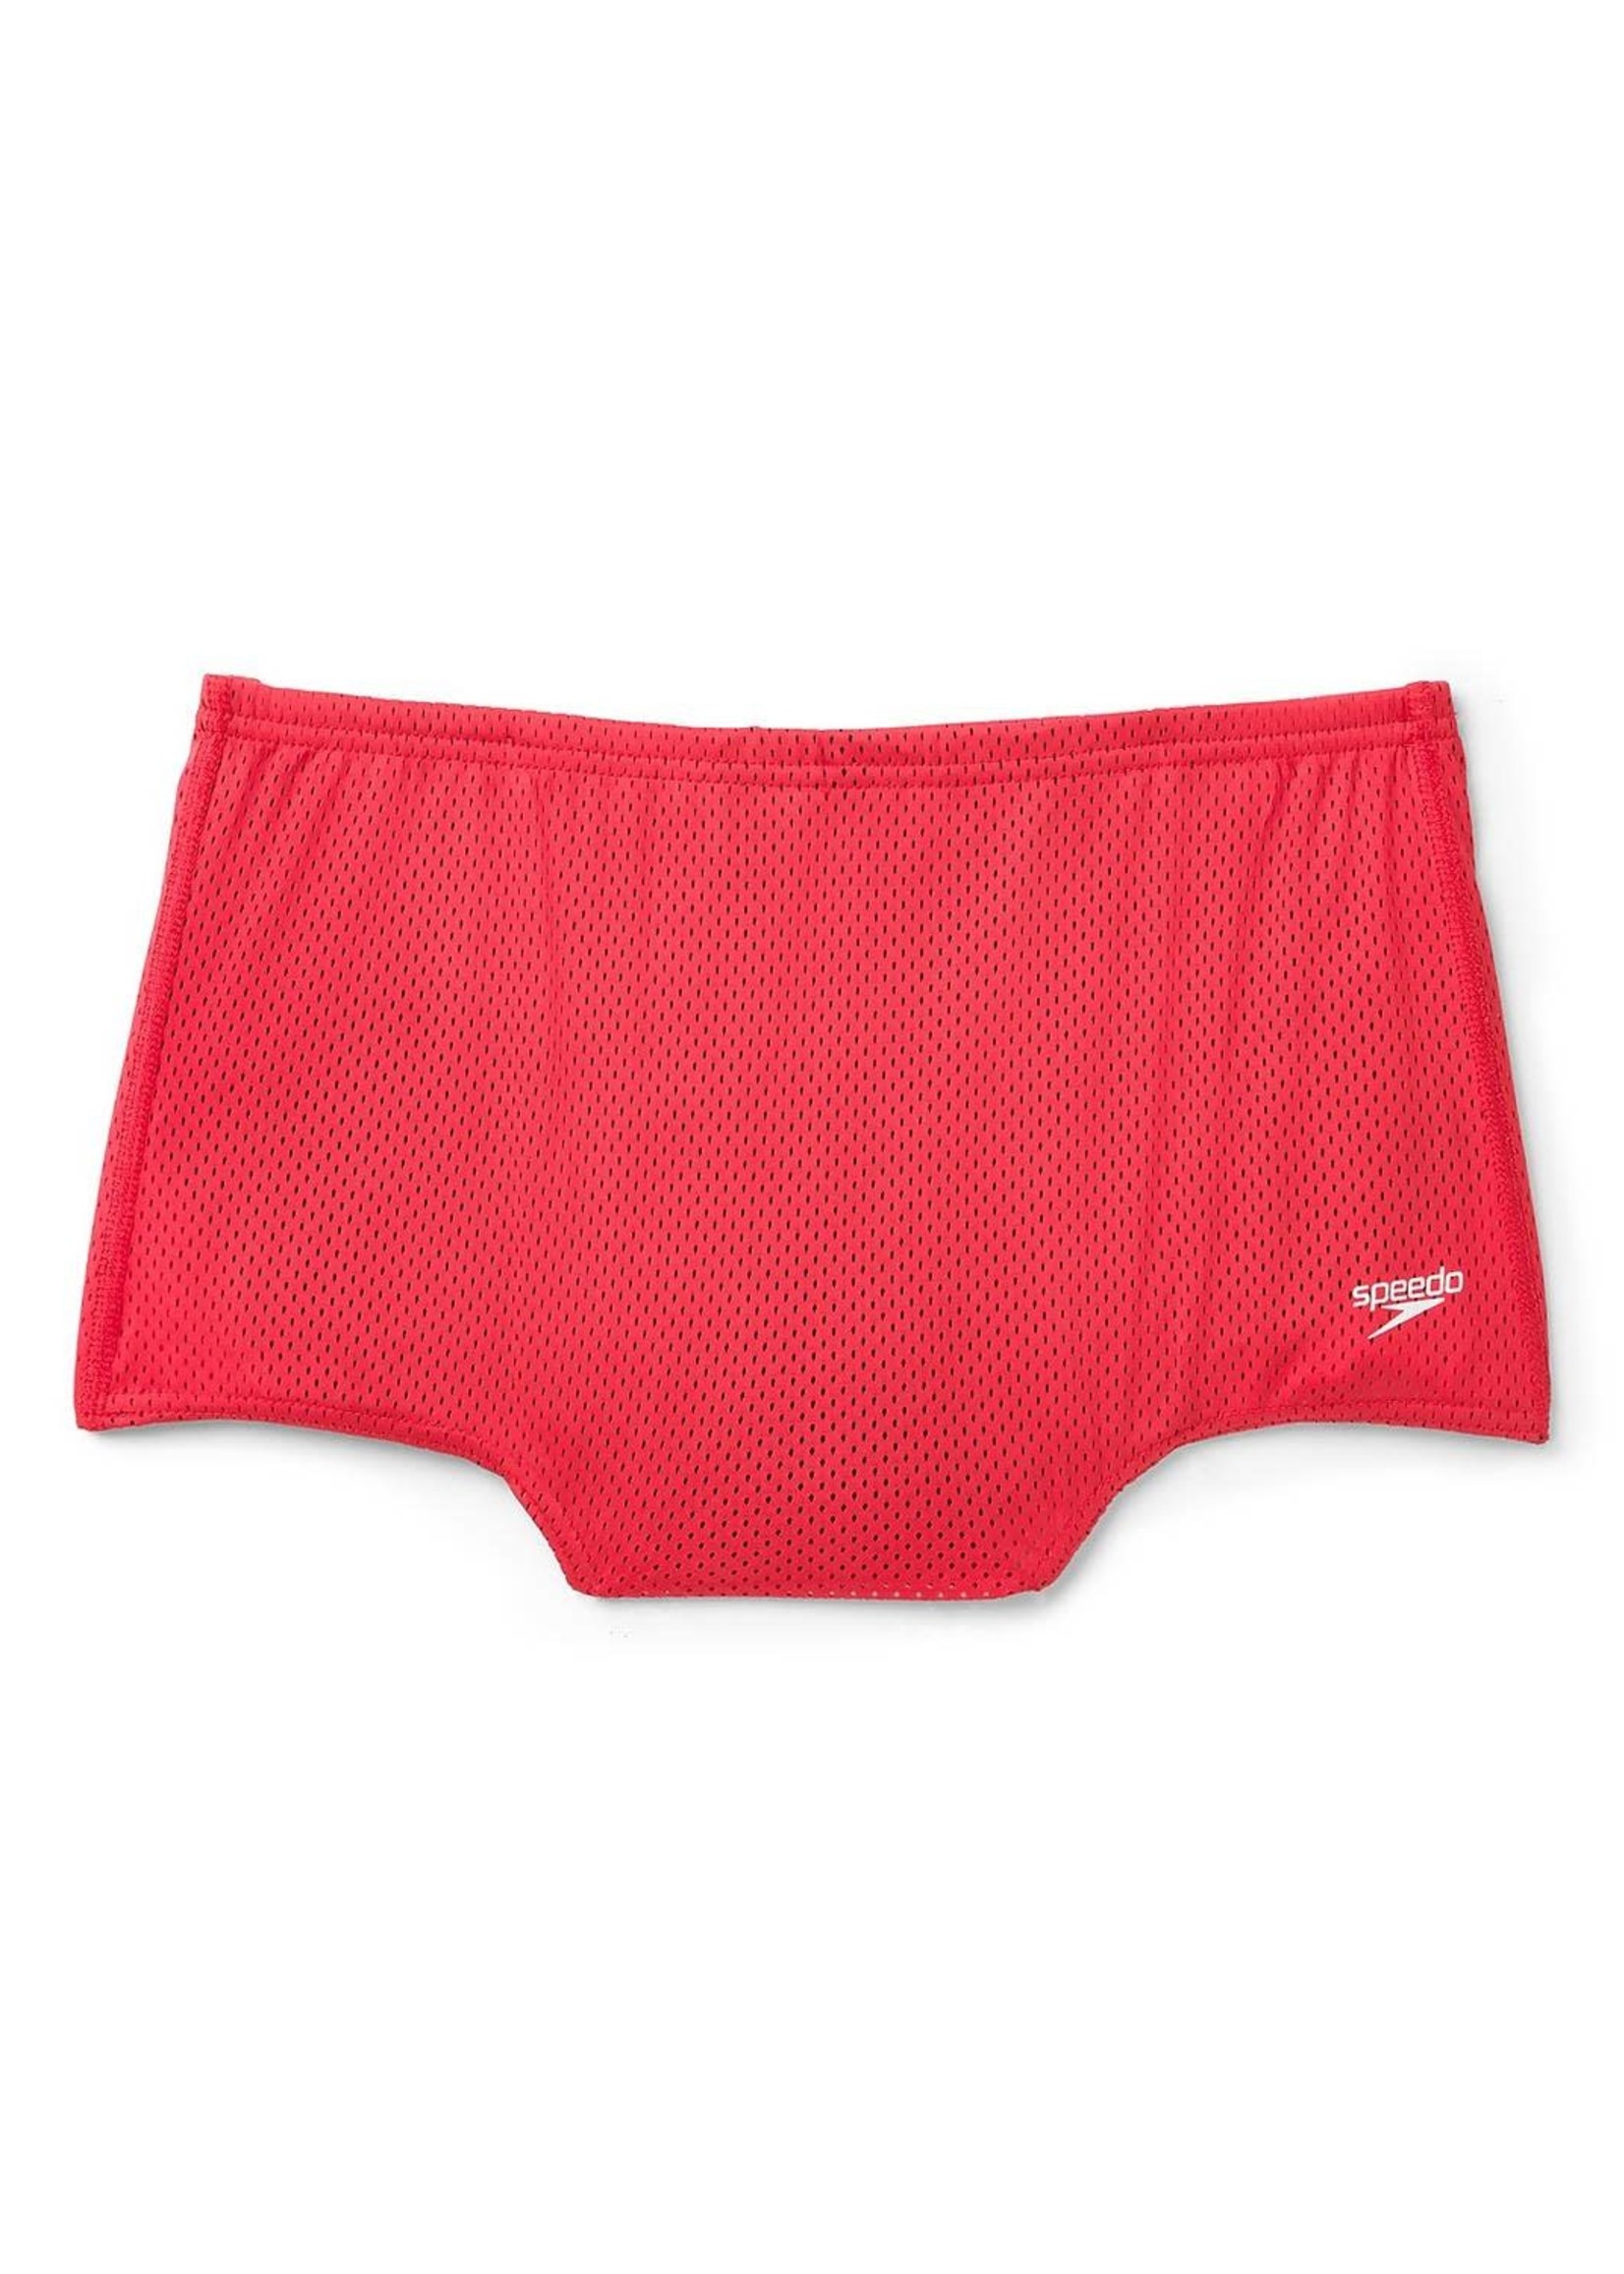 Poly Mesh Training Suit 601 Red